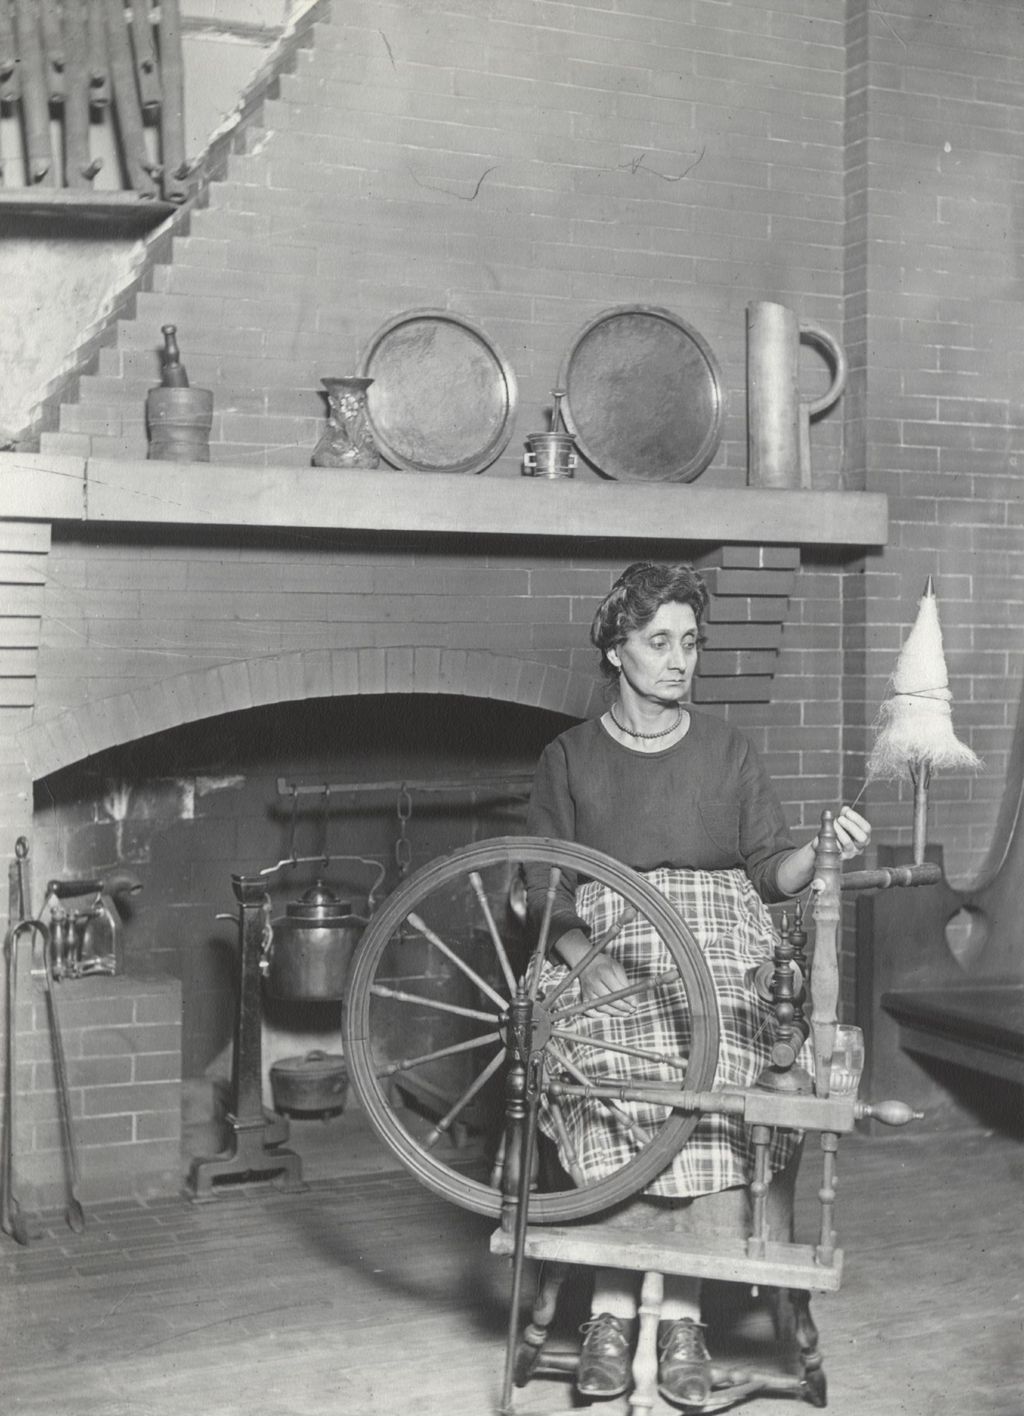 Miniature of Woman at spinning wheel in Hull-house Labor Museum